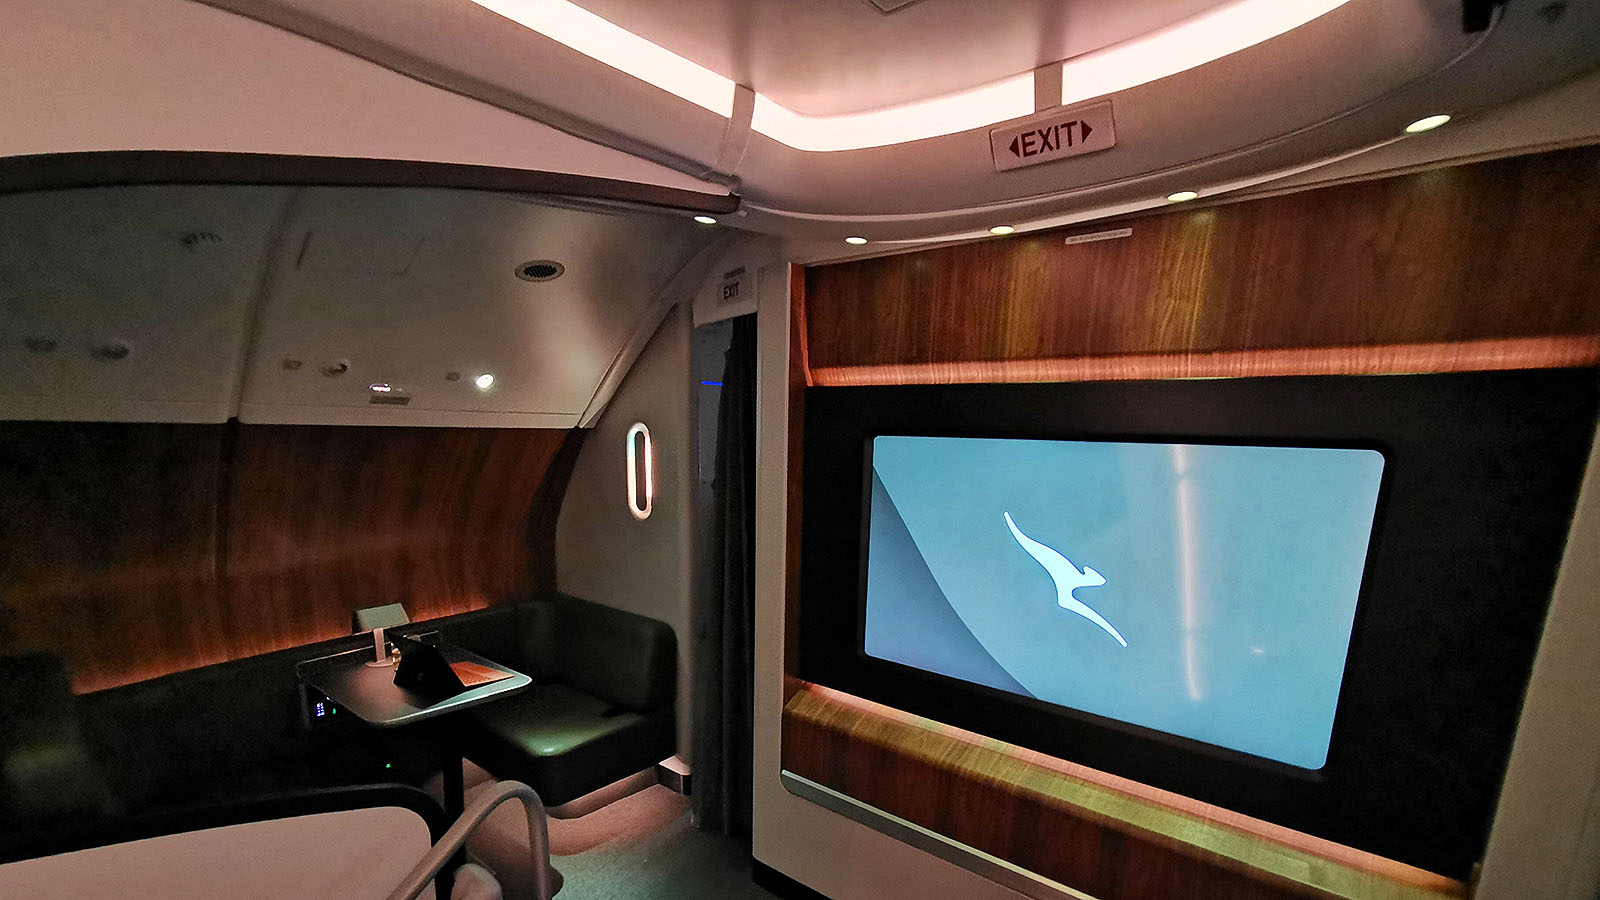 Space in Qantas Airbus A380 inflight lounge for Business and First